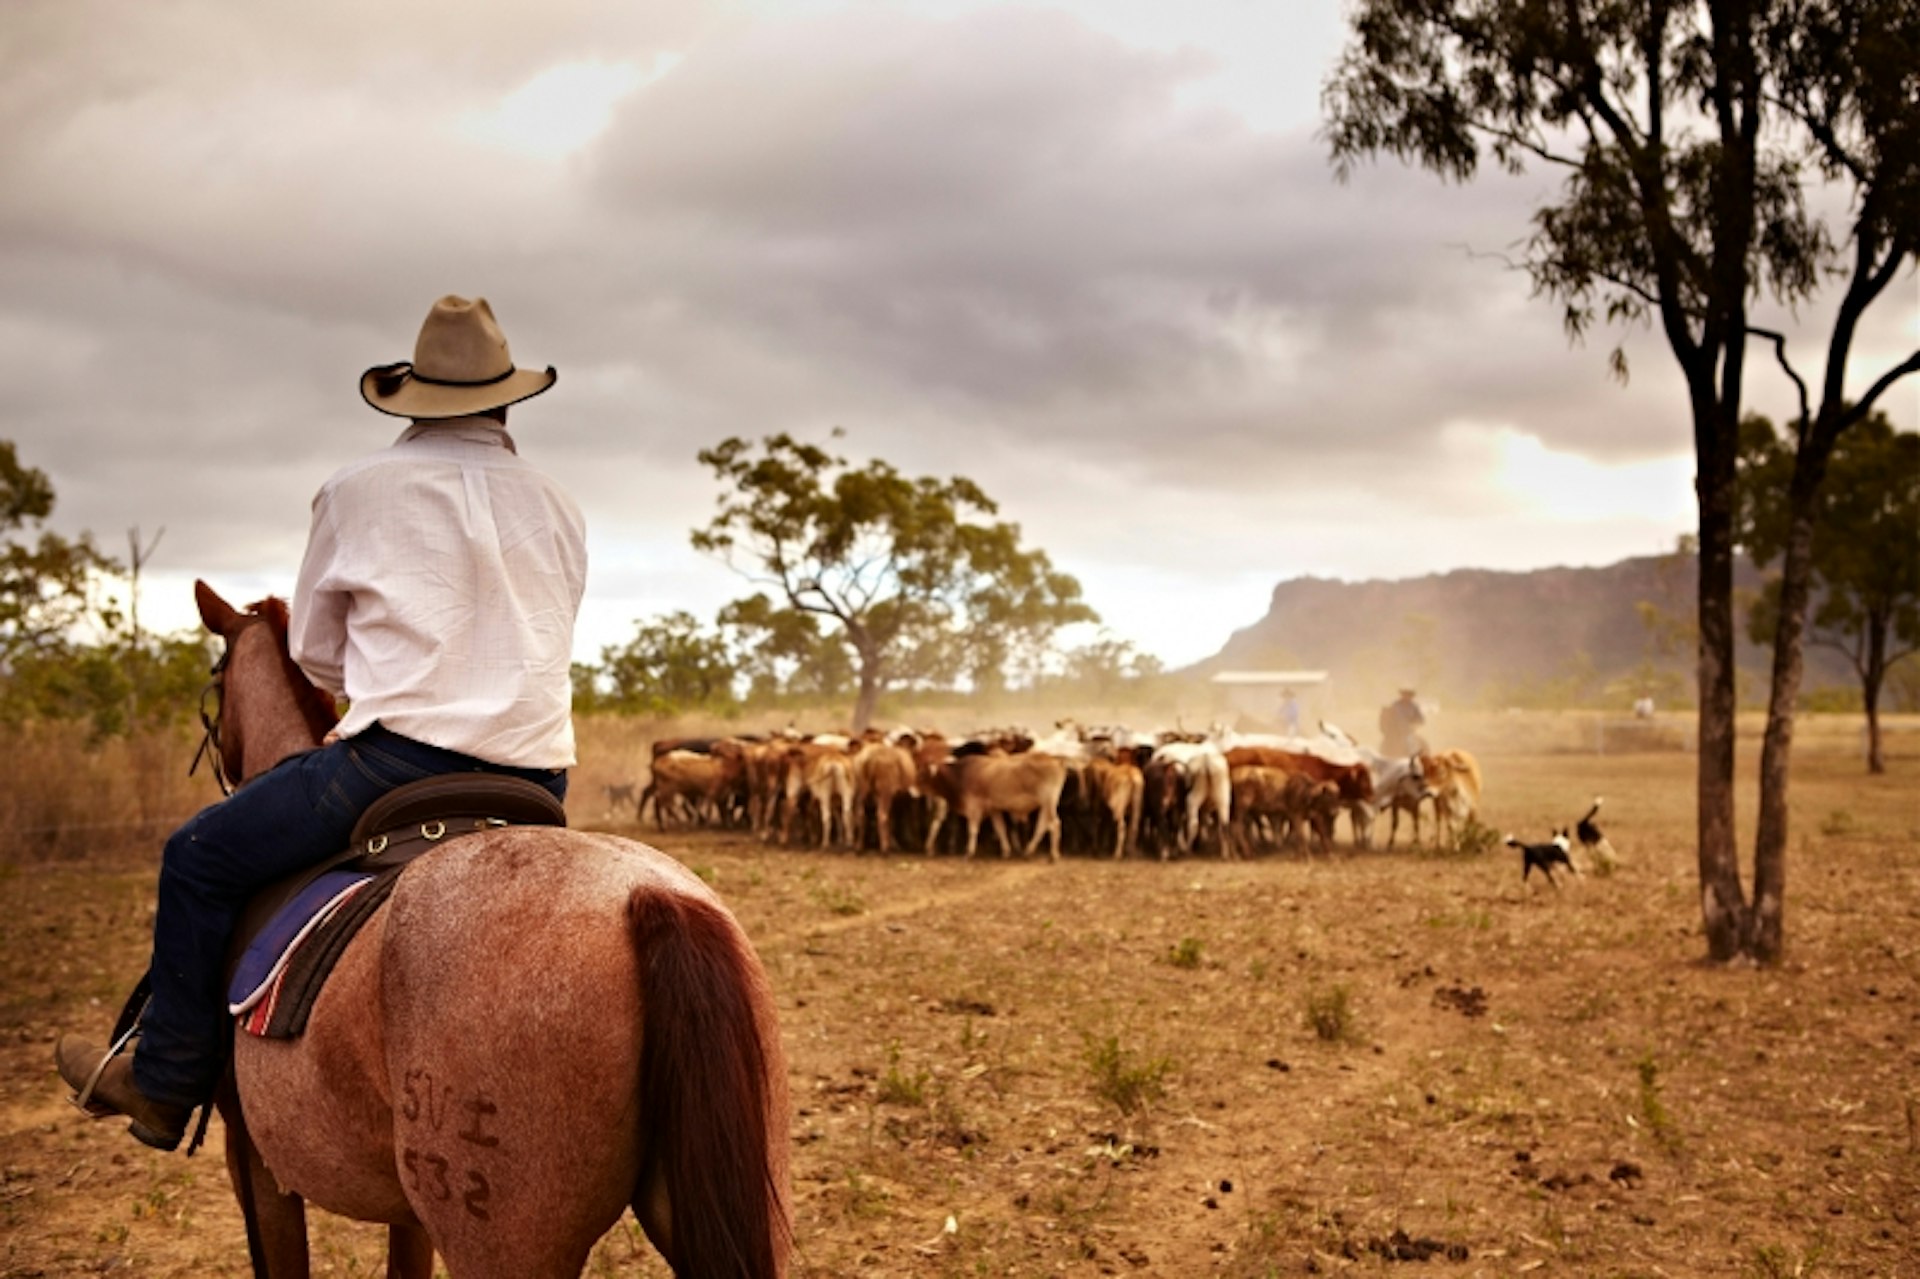 Mustering cattle in outback Queensland. Image by Matt Munro / Lonely Planet ©